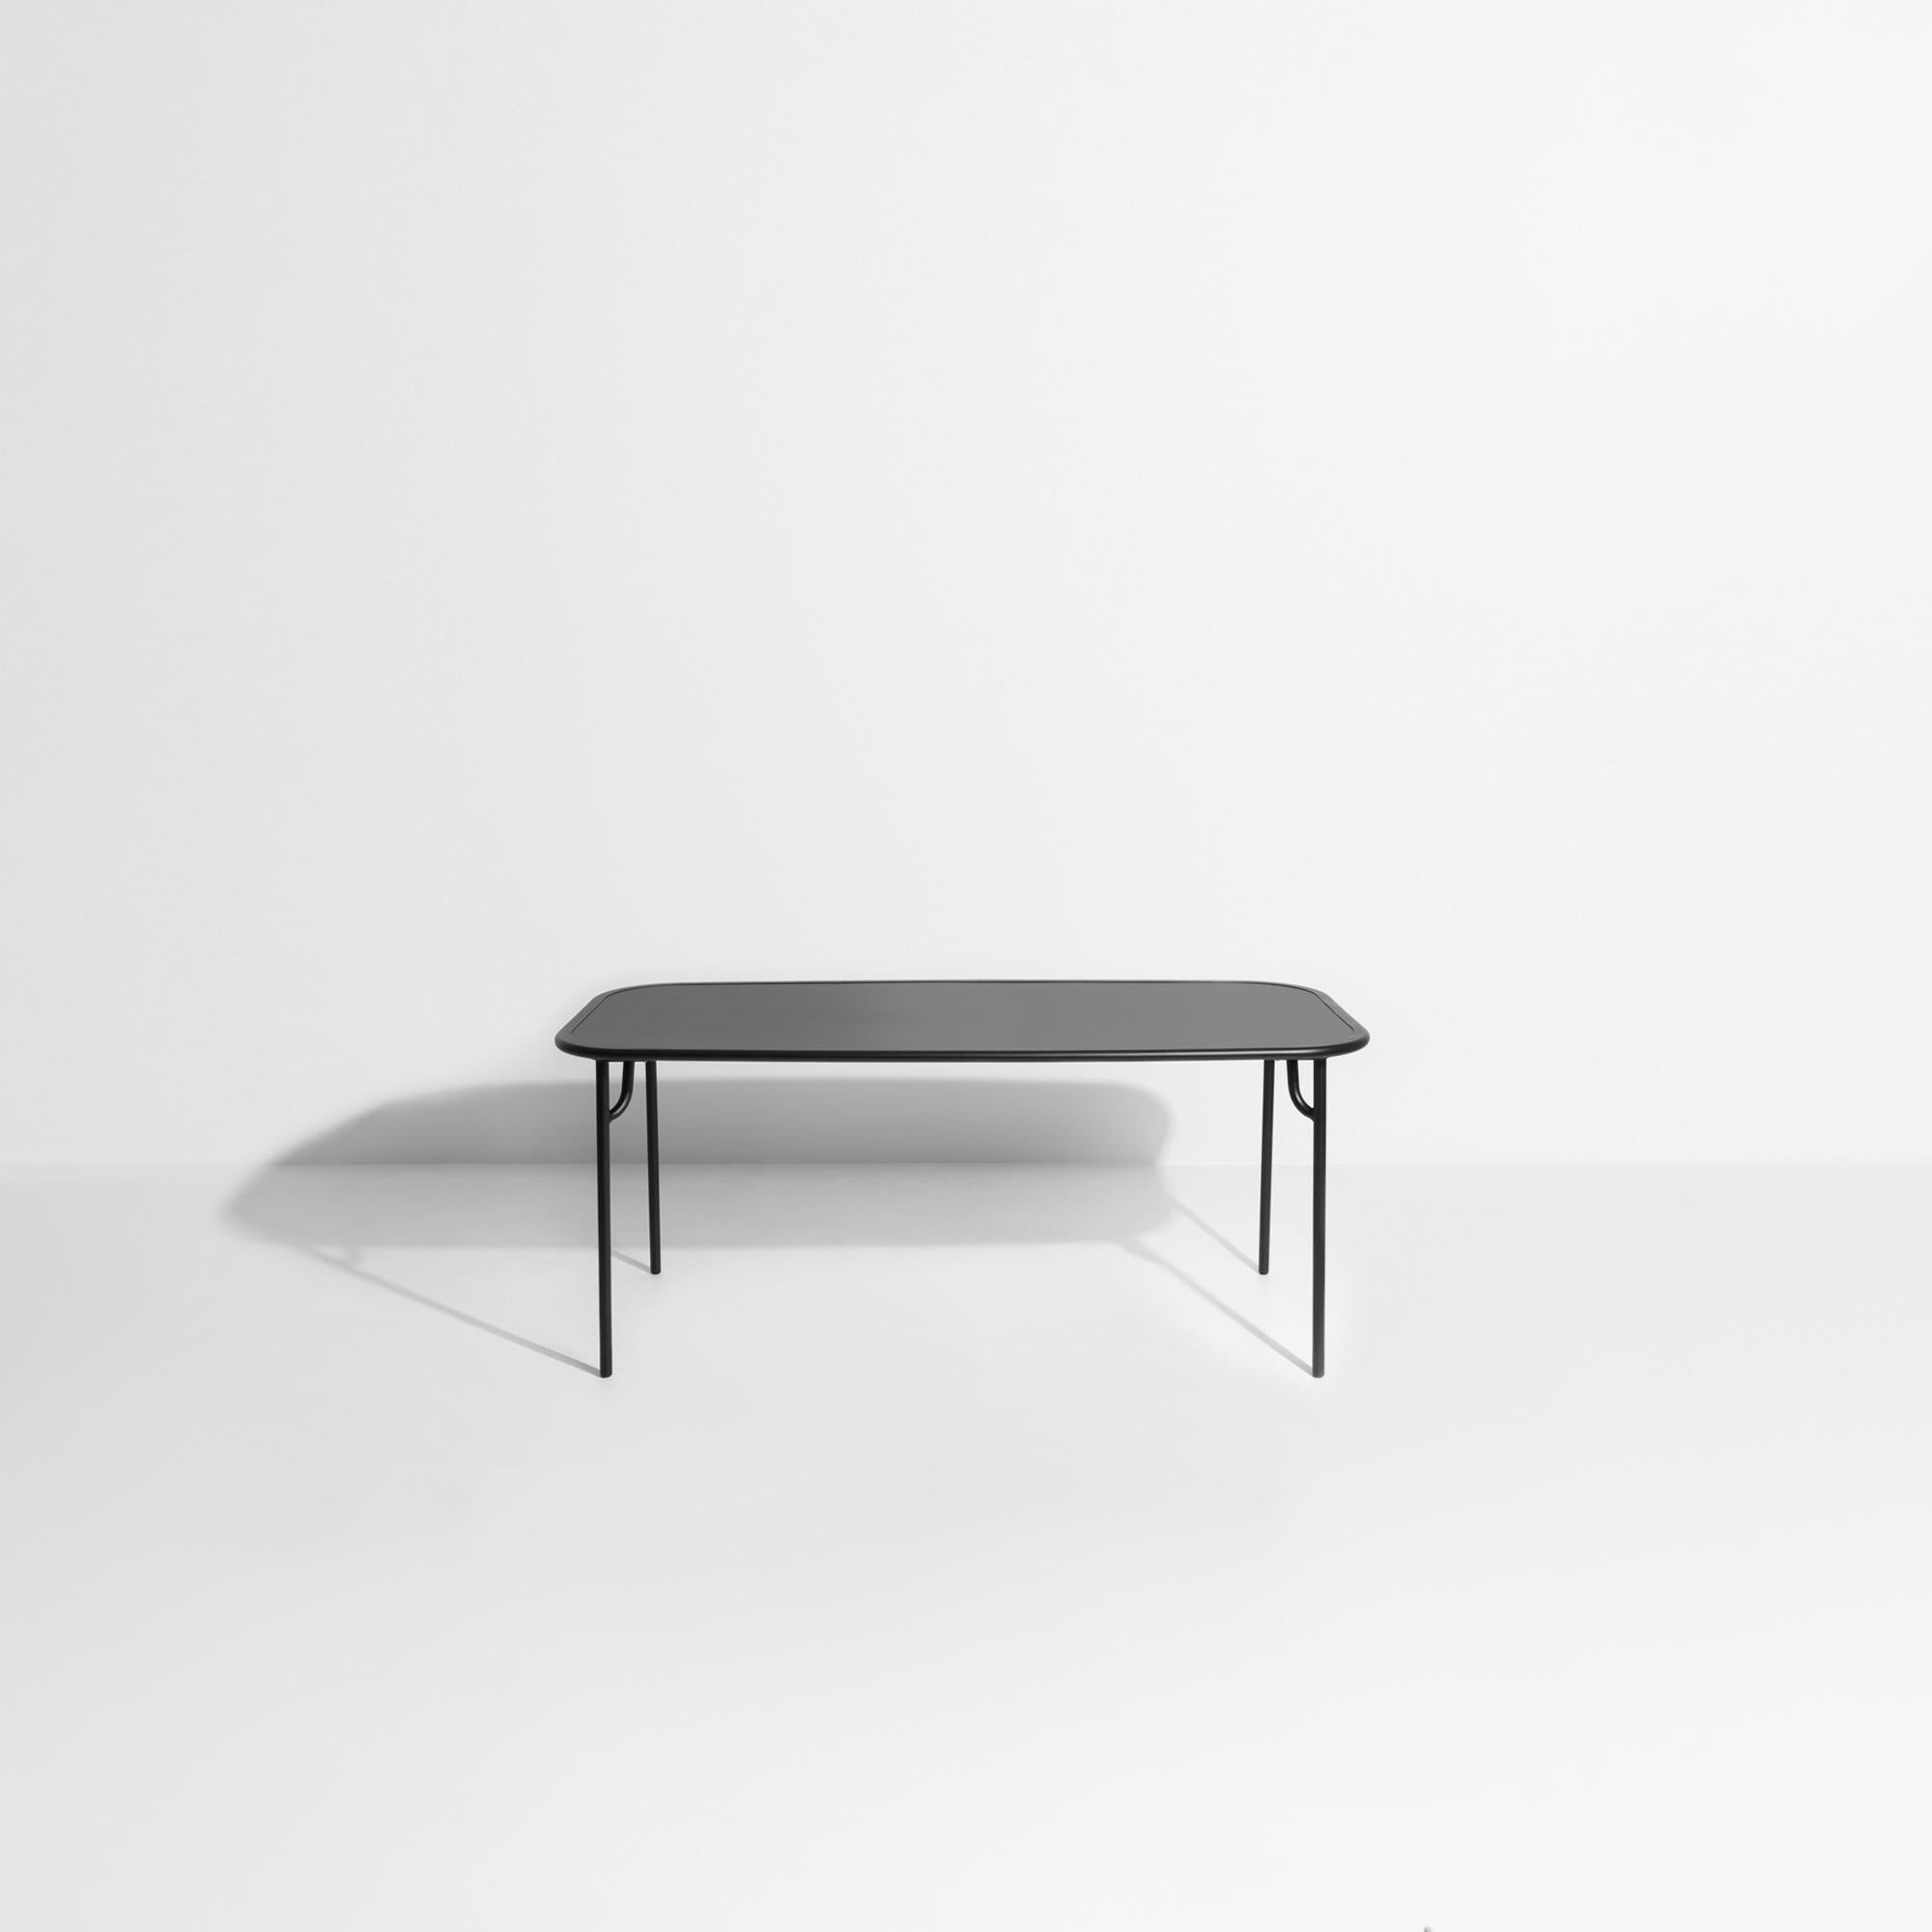 Petite Friture Week-End Medium Plain Rectangular Dining Table in Black Aluminium In New Condition For Sale In Brooklyn, NY